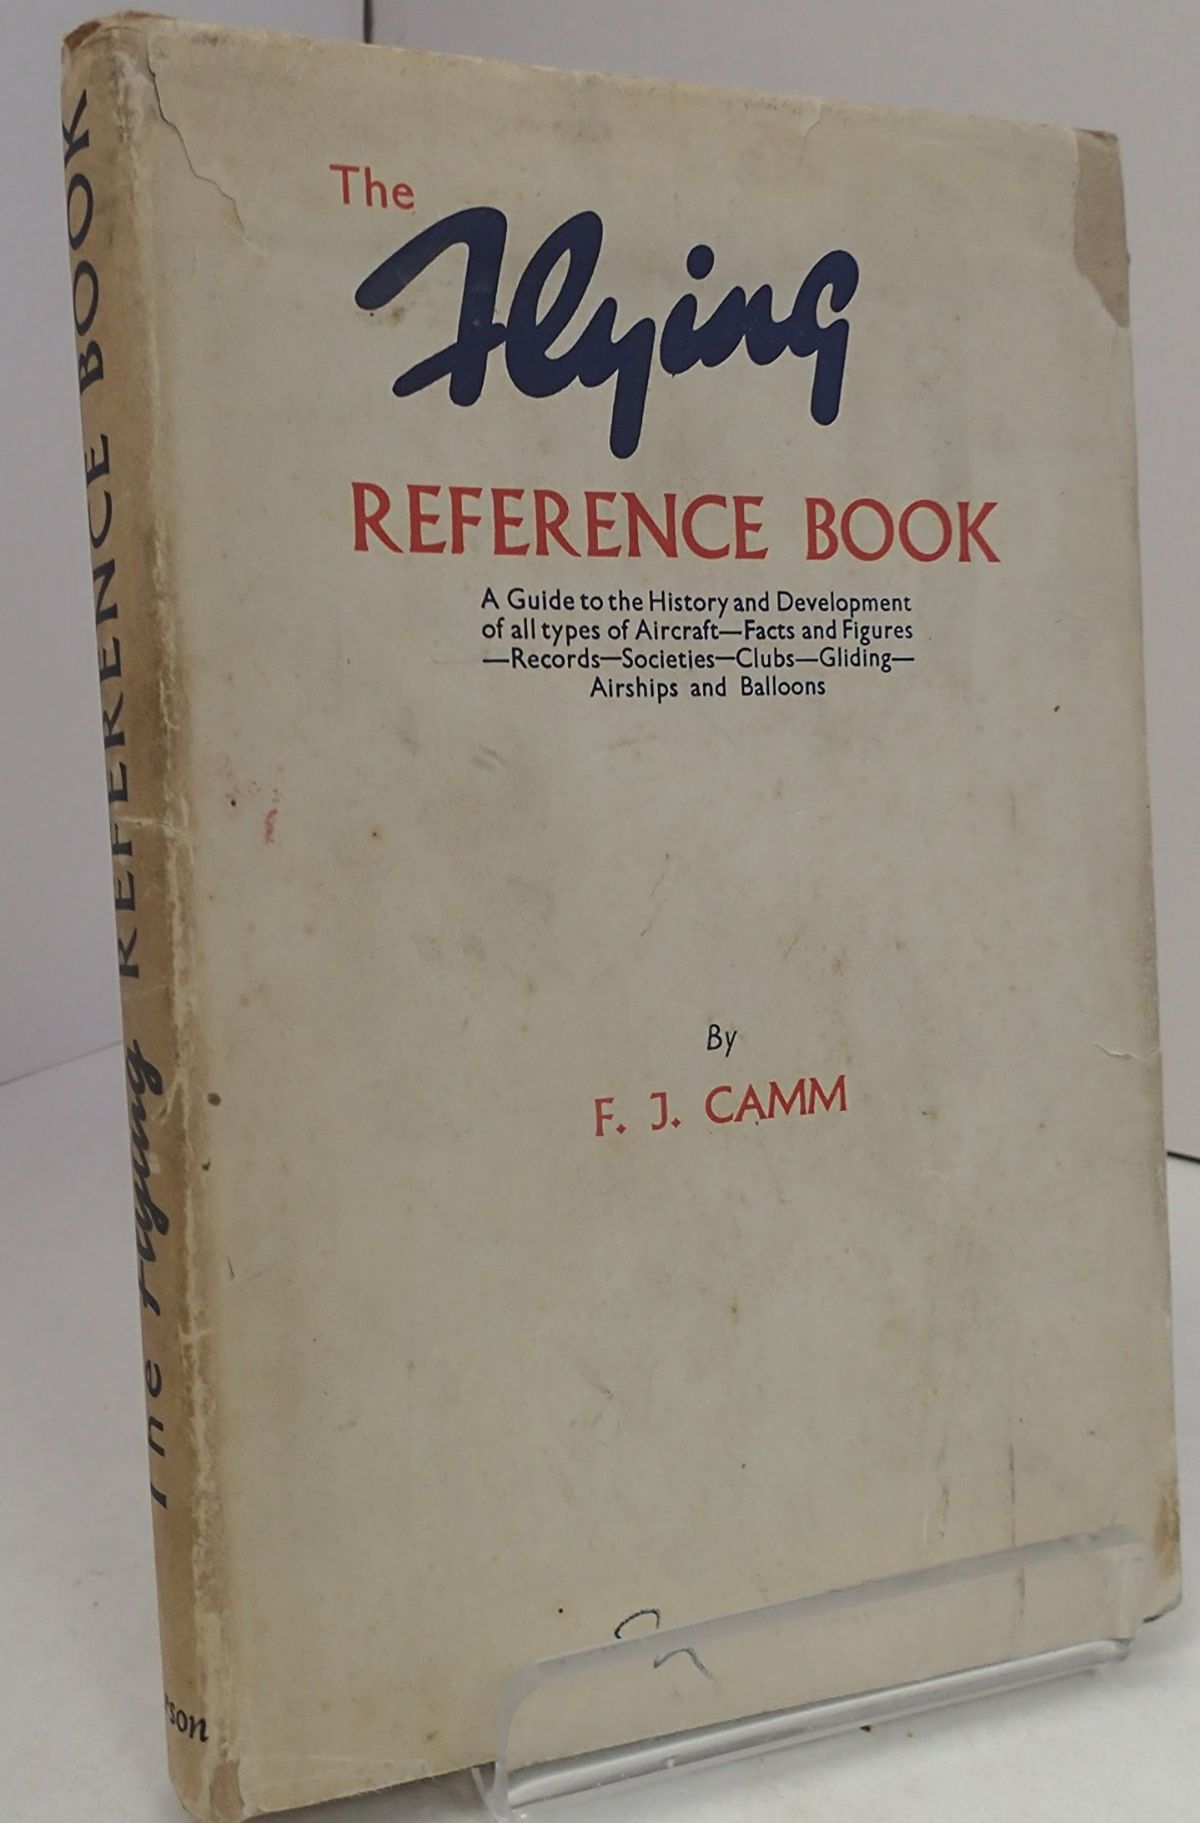 THE FLYING REFERENCE BOOK